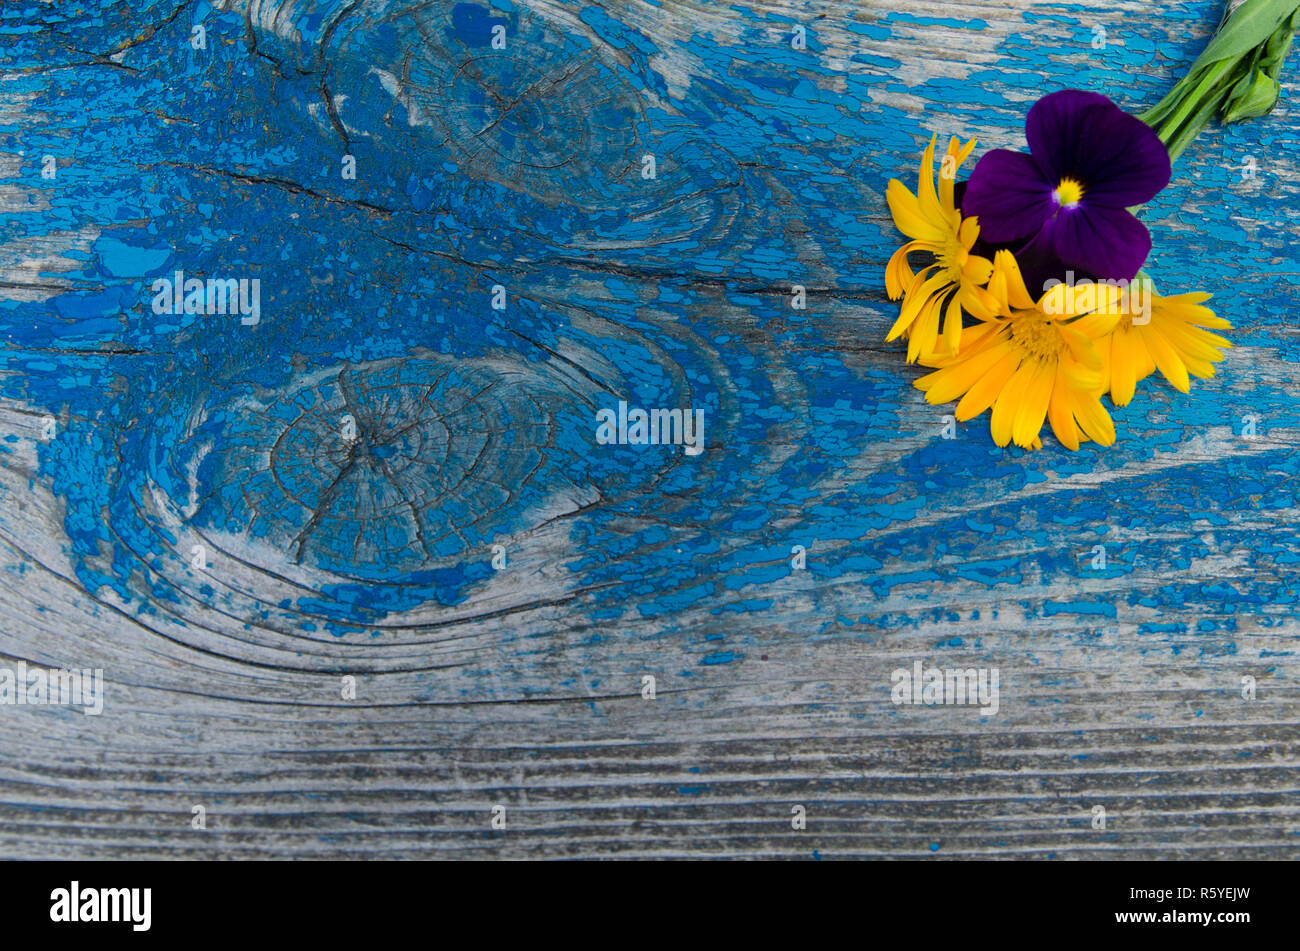 Composition of flowers of calendula and violets on top of an old wooden painted board with dowels Stock Photo